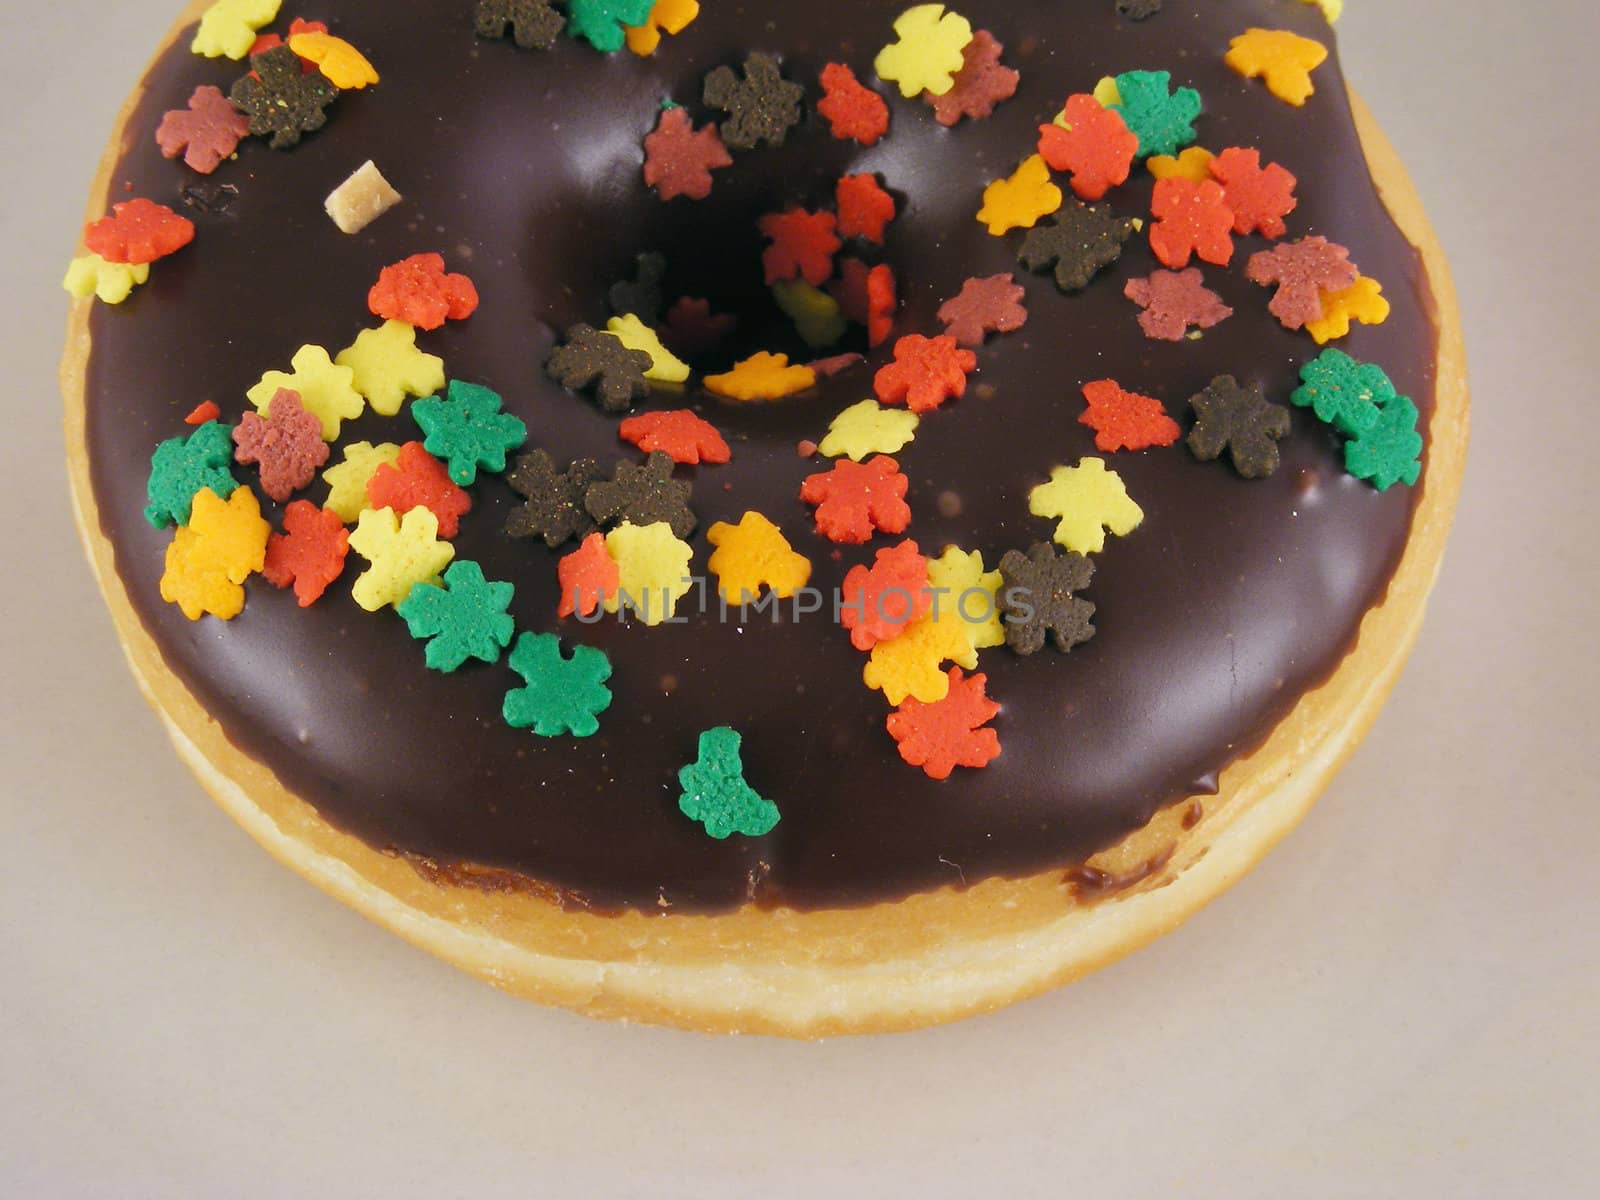 A chocolate iced donut with sprinkles on a plate.